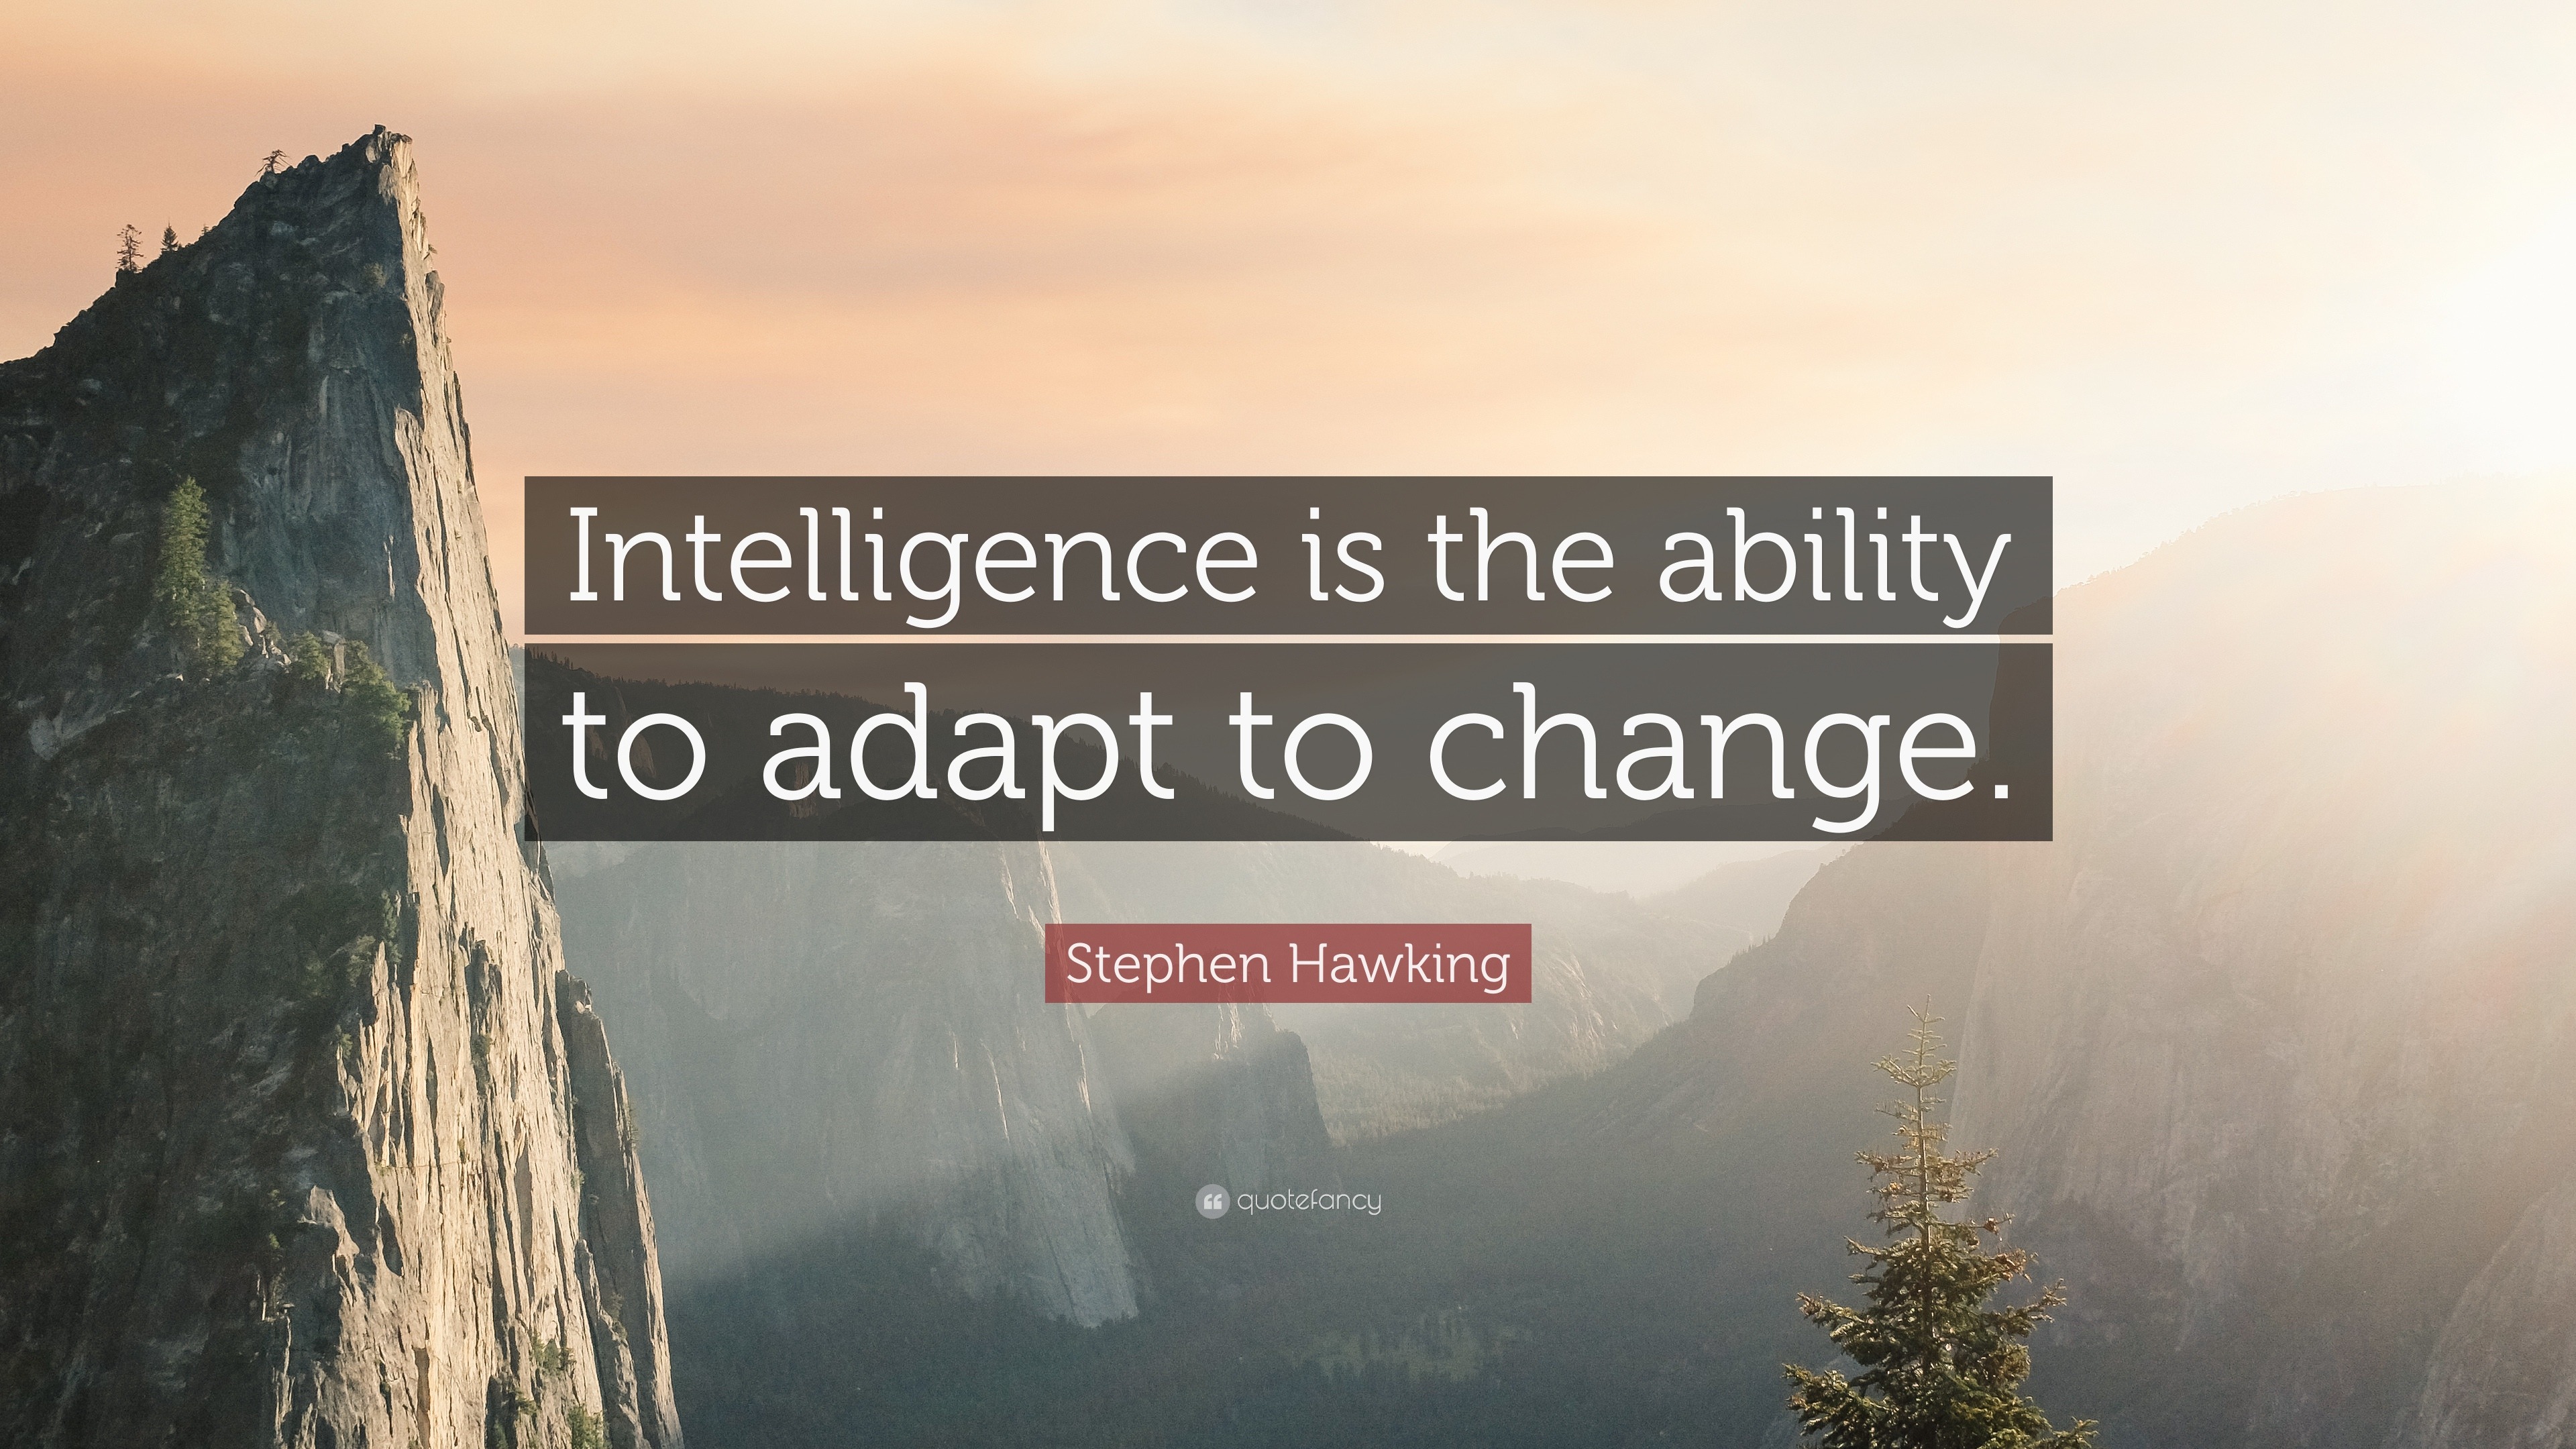 Stephen Hawking Quote: “Intelligence is the ability to adapt to change.